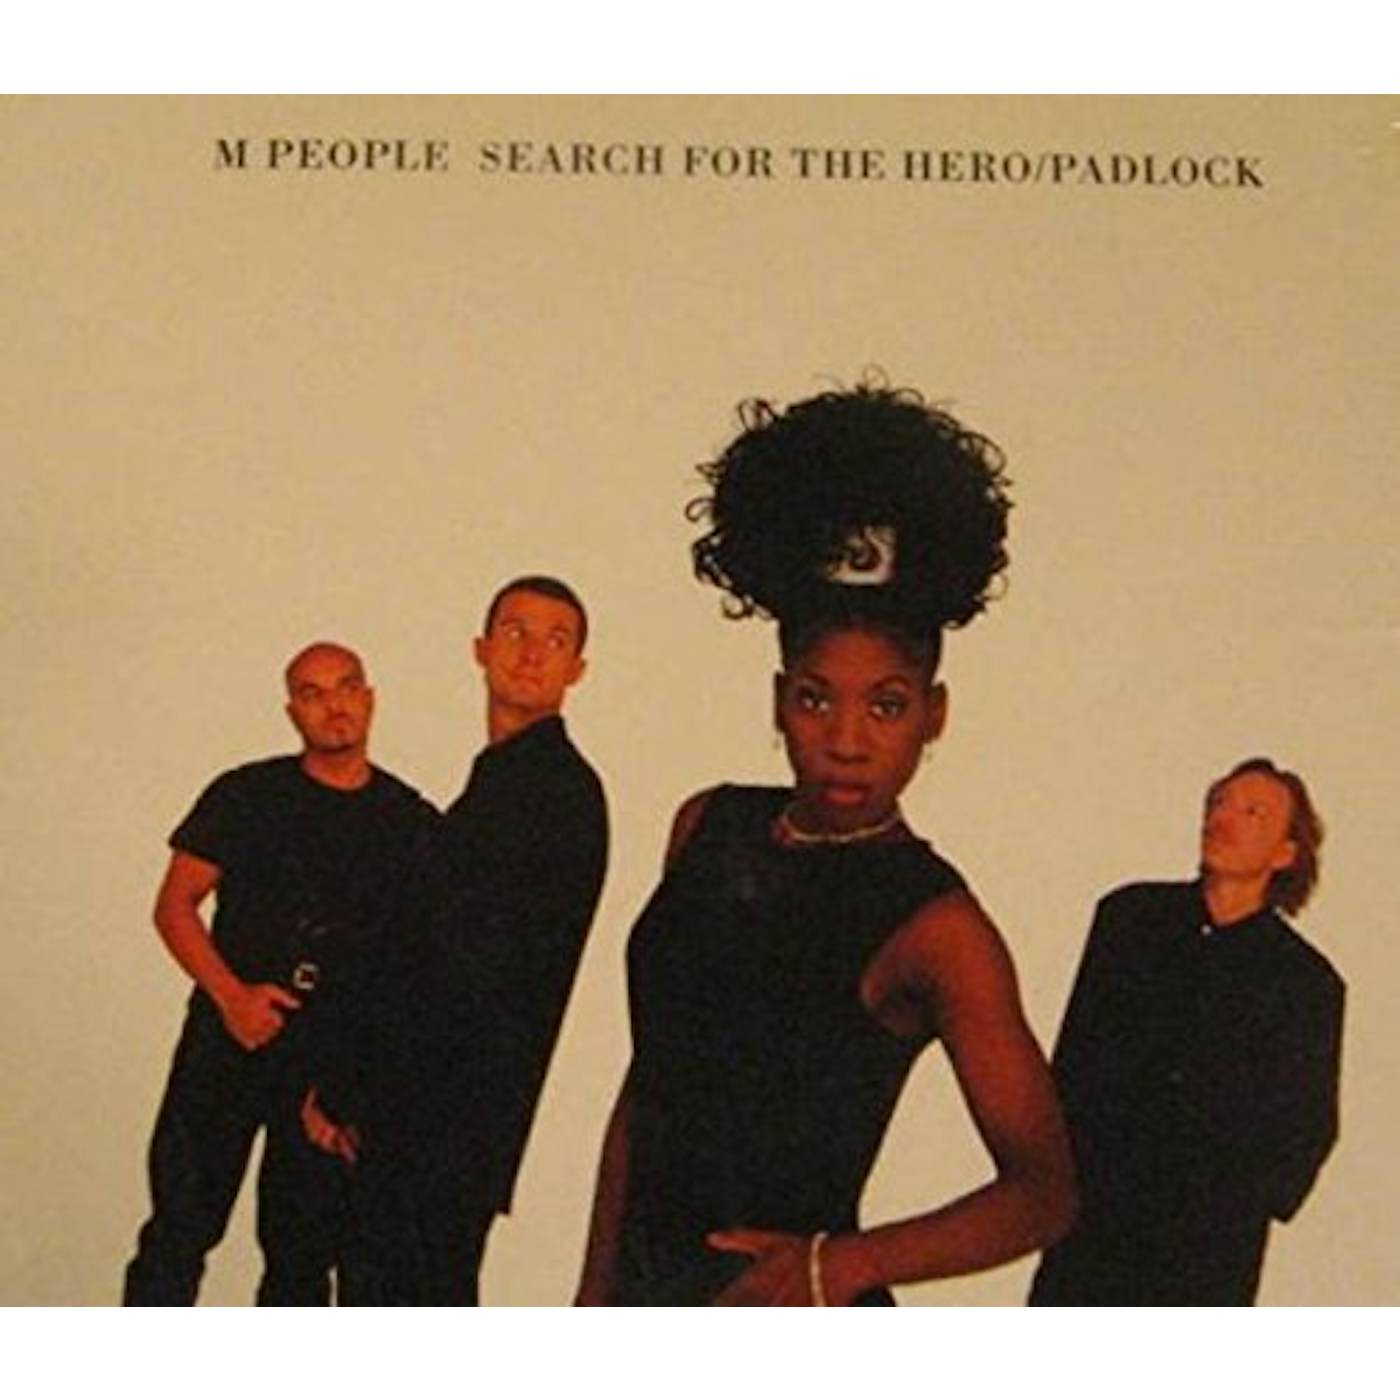 M People PADLOCK (X4) / SEARCH FOR THE HERO Vinyl Record